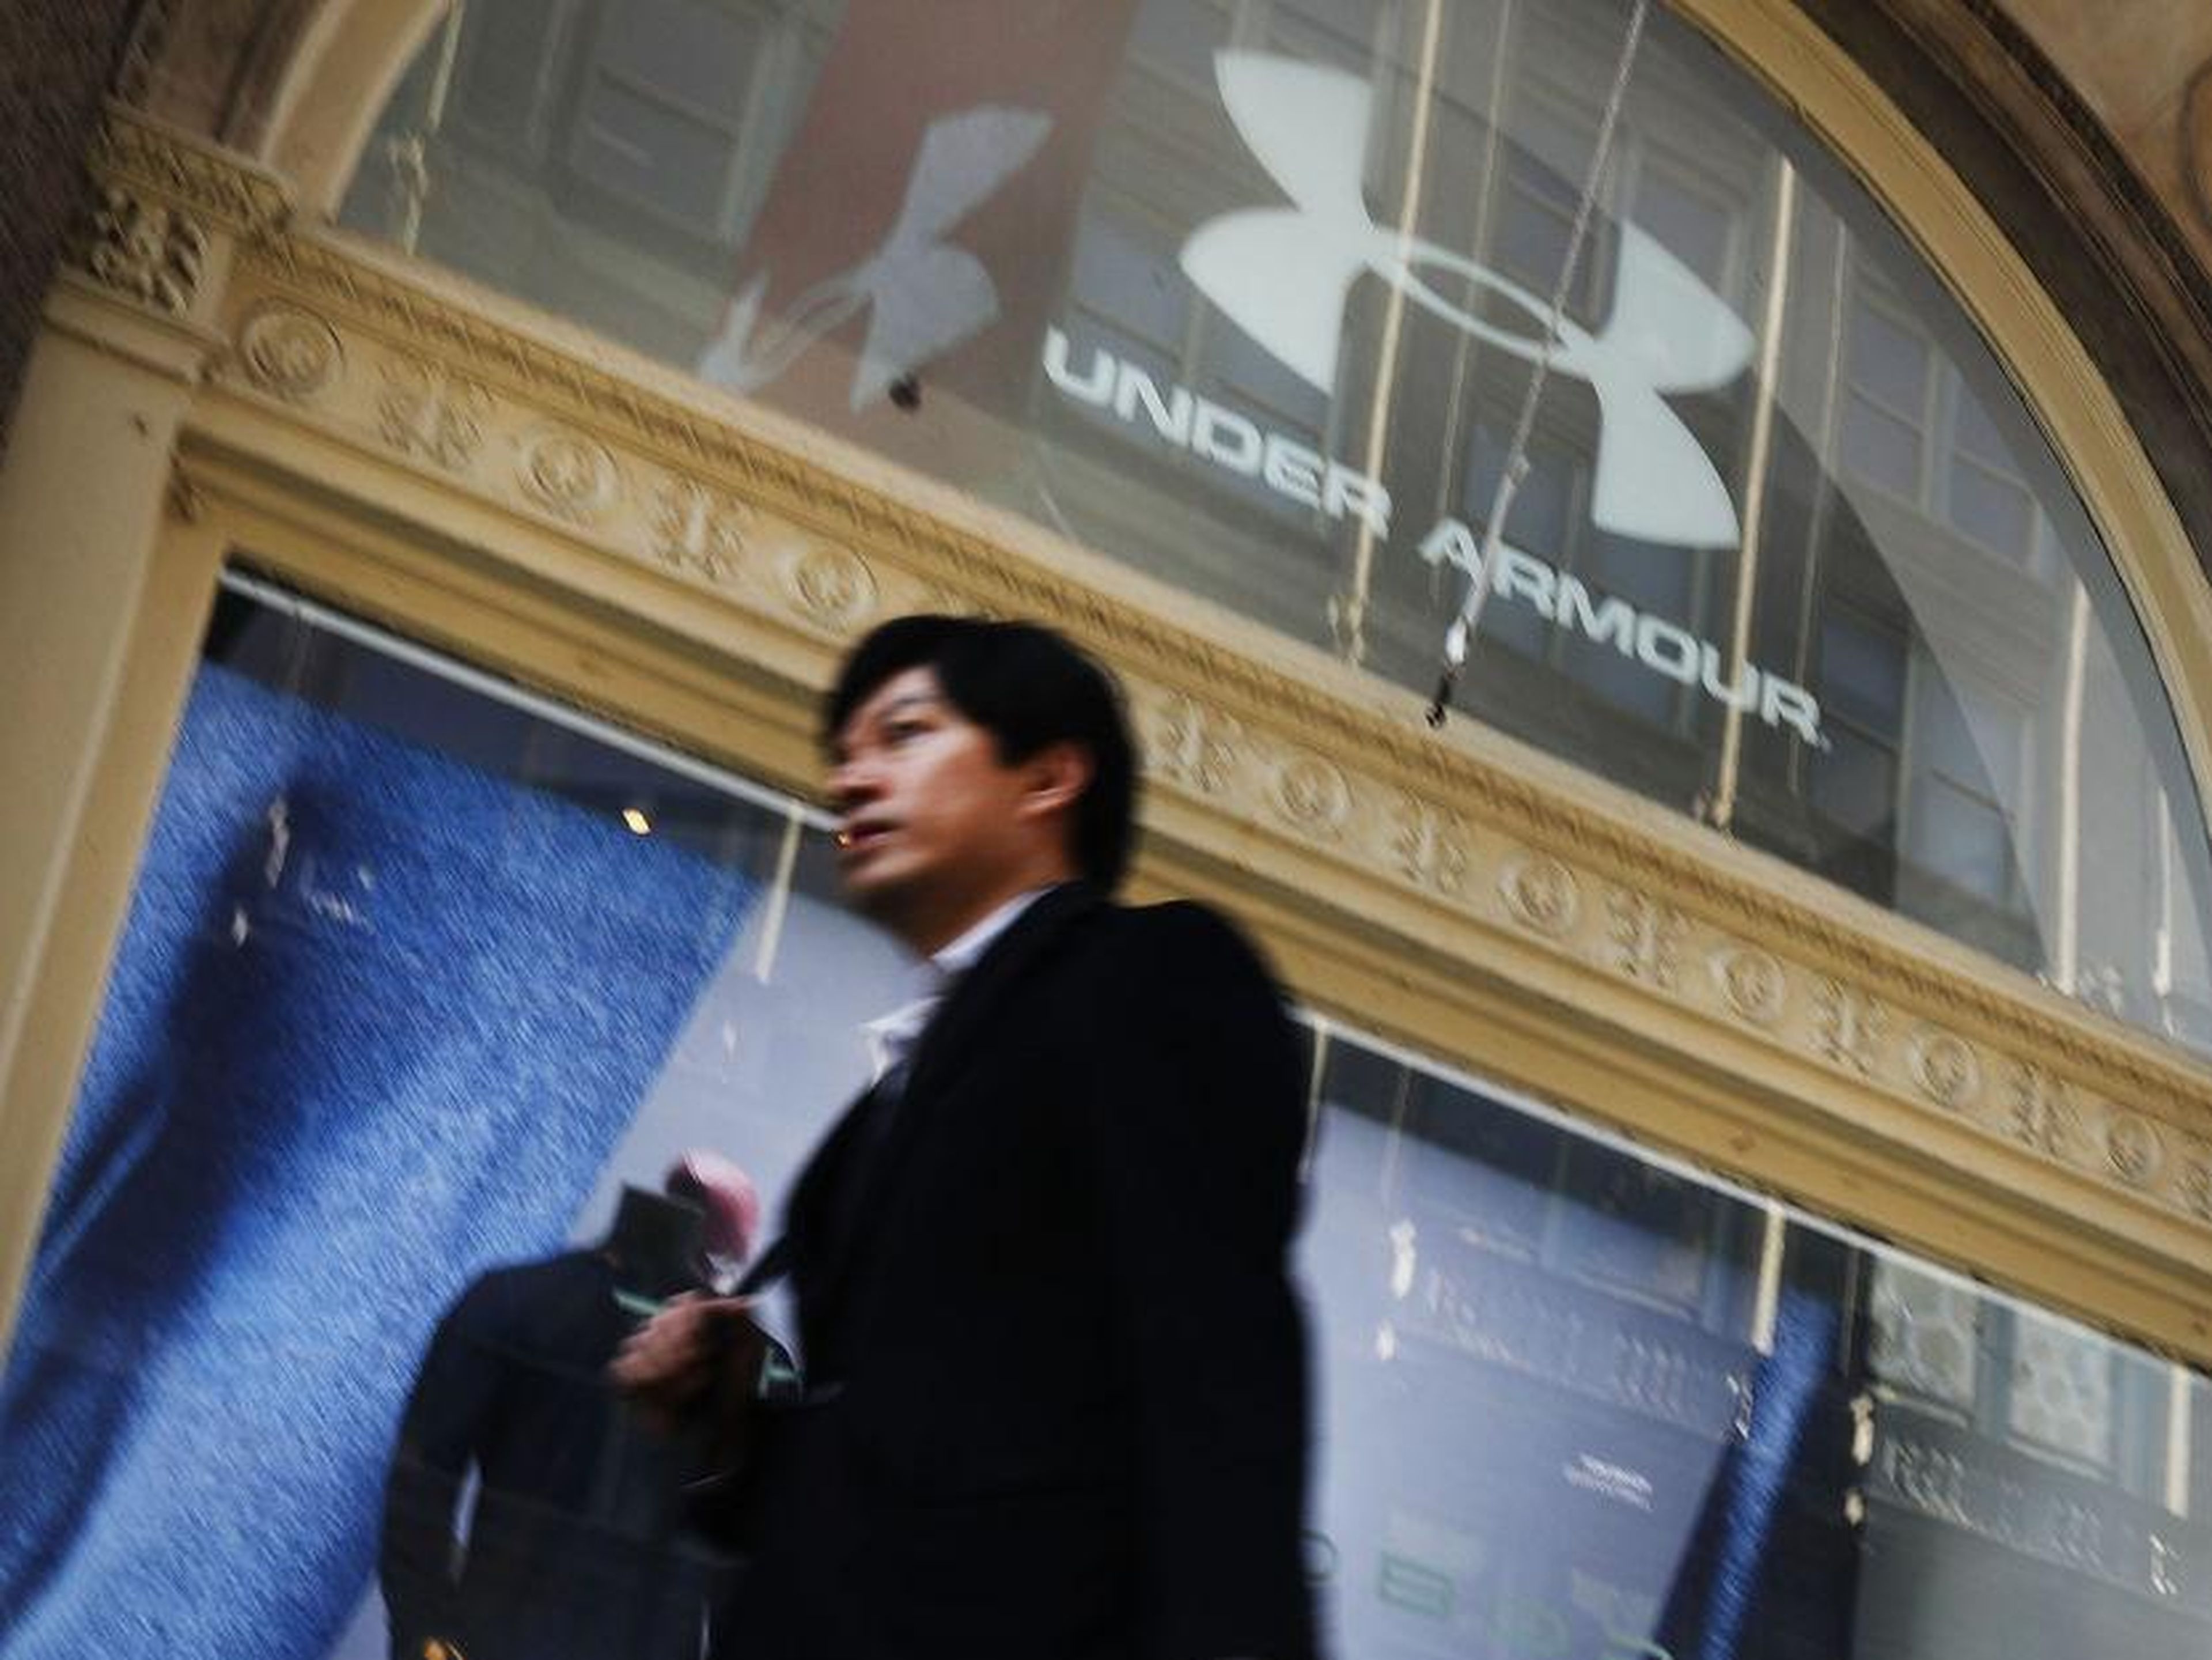 7. An Under Armour data breach affected 150 million users of the store's mobile app in 2018.